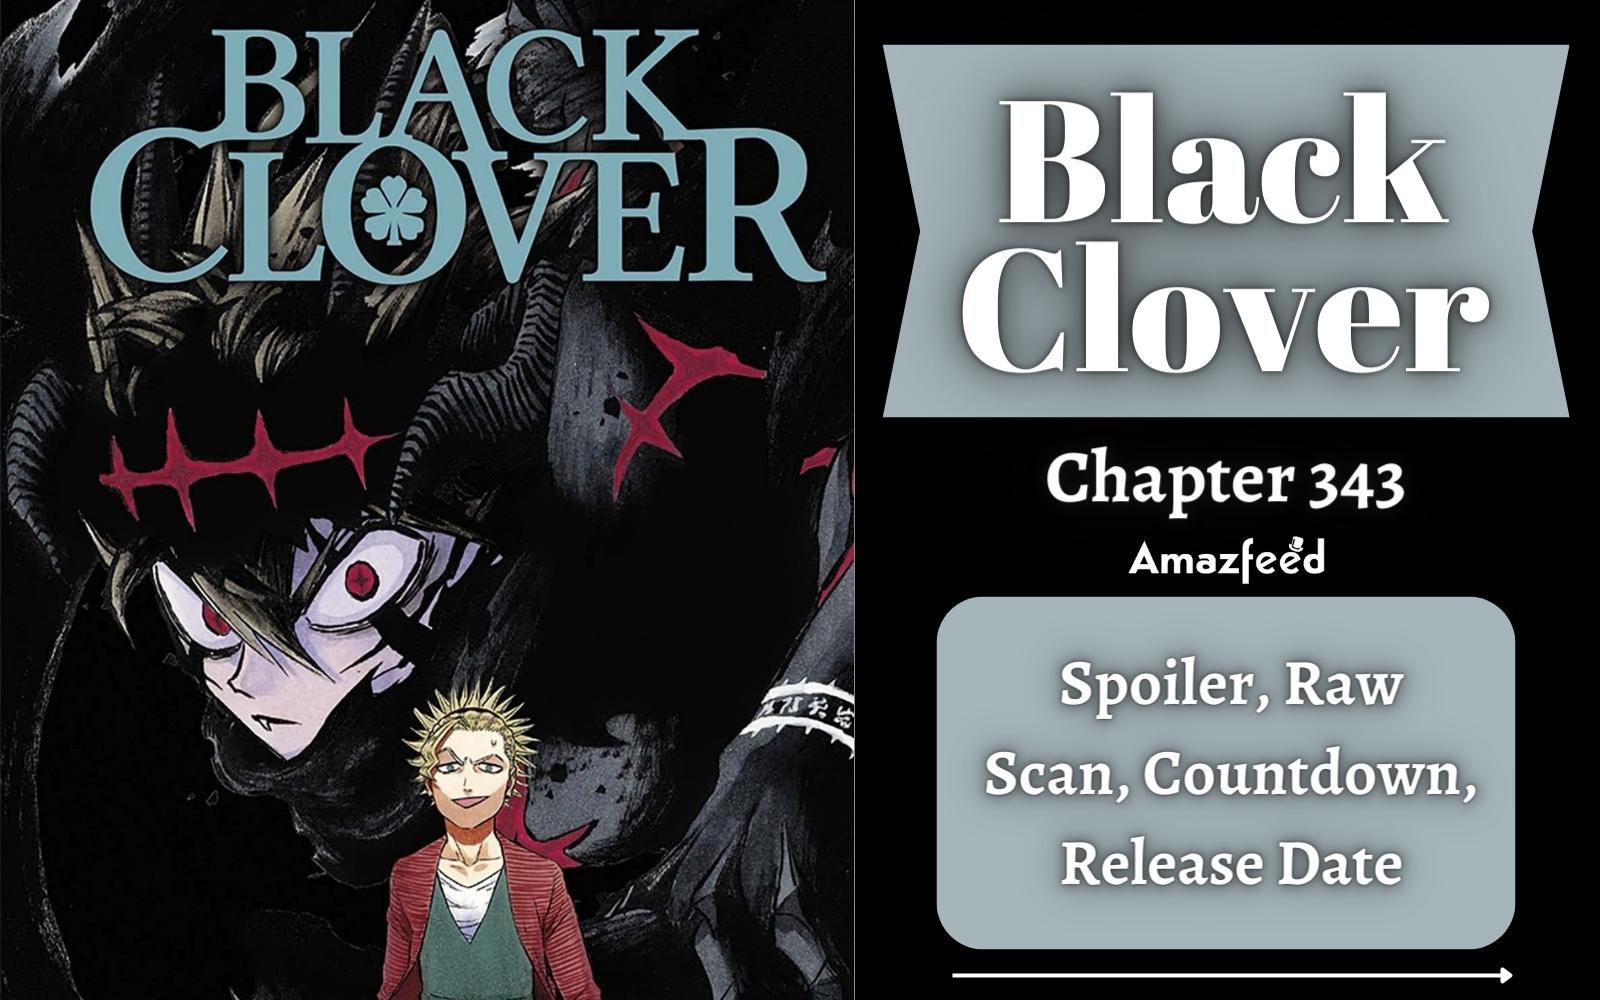 Black Clover Chapter 343 Spoiler, Plot, Raw Scan, Color Page, and Release Date